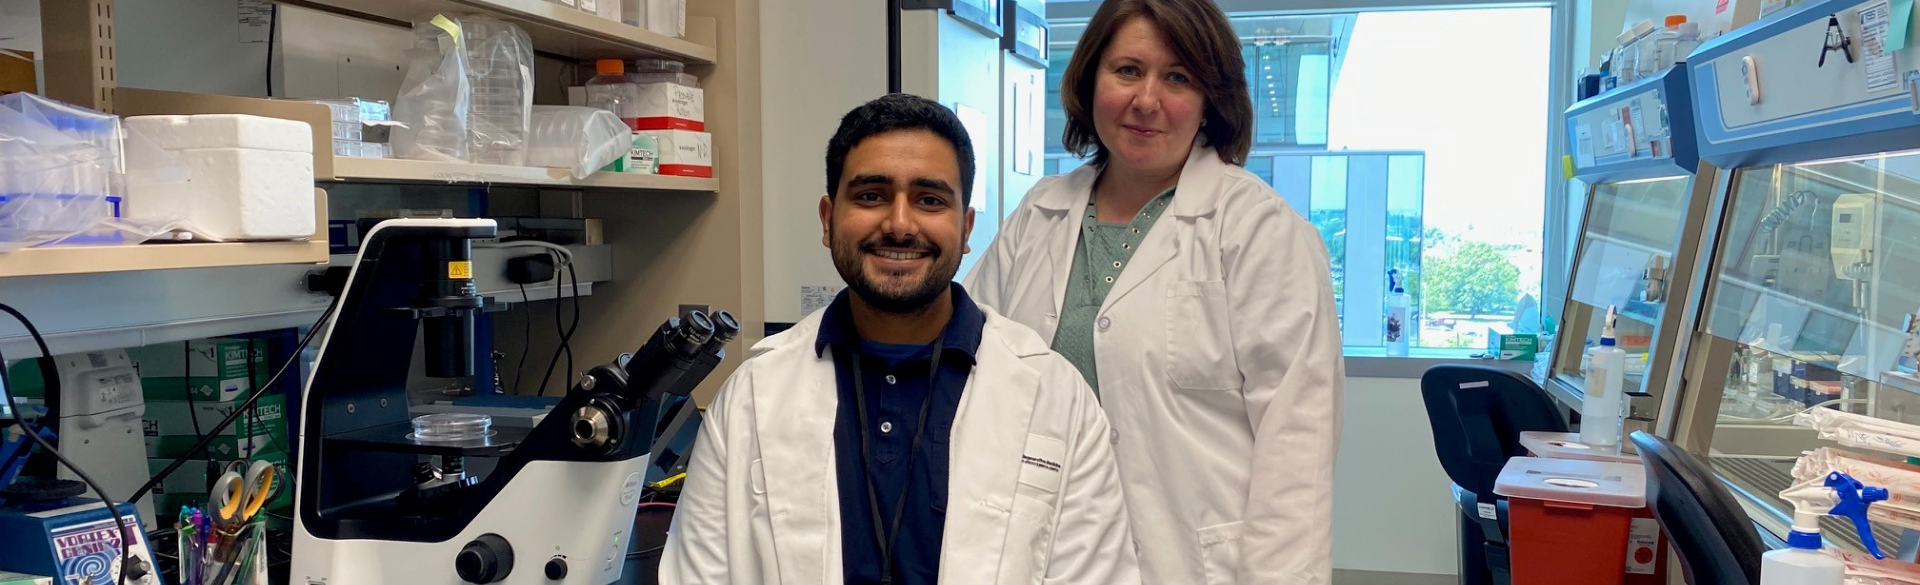 Gates summer intern works in laboratory to help research Ehlers-Danlos syndrome, a condition he has been diagnosed with.